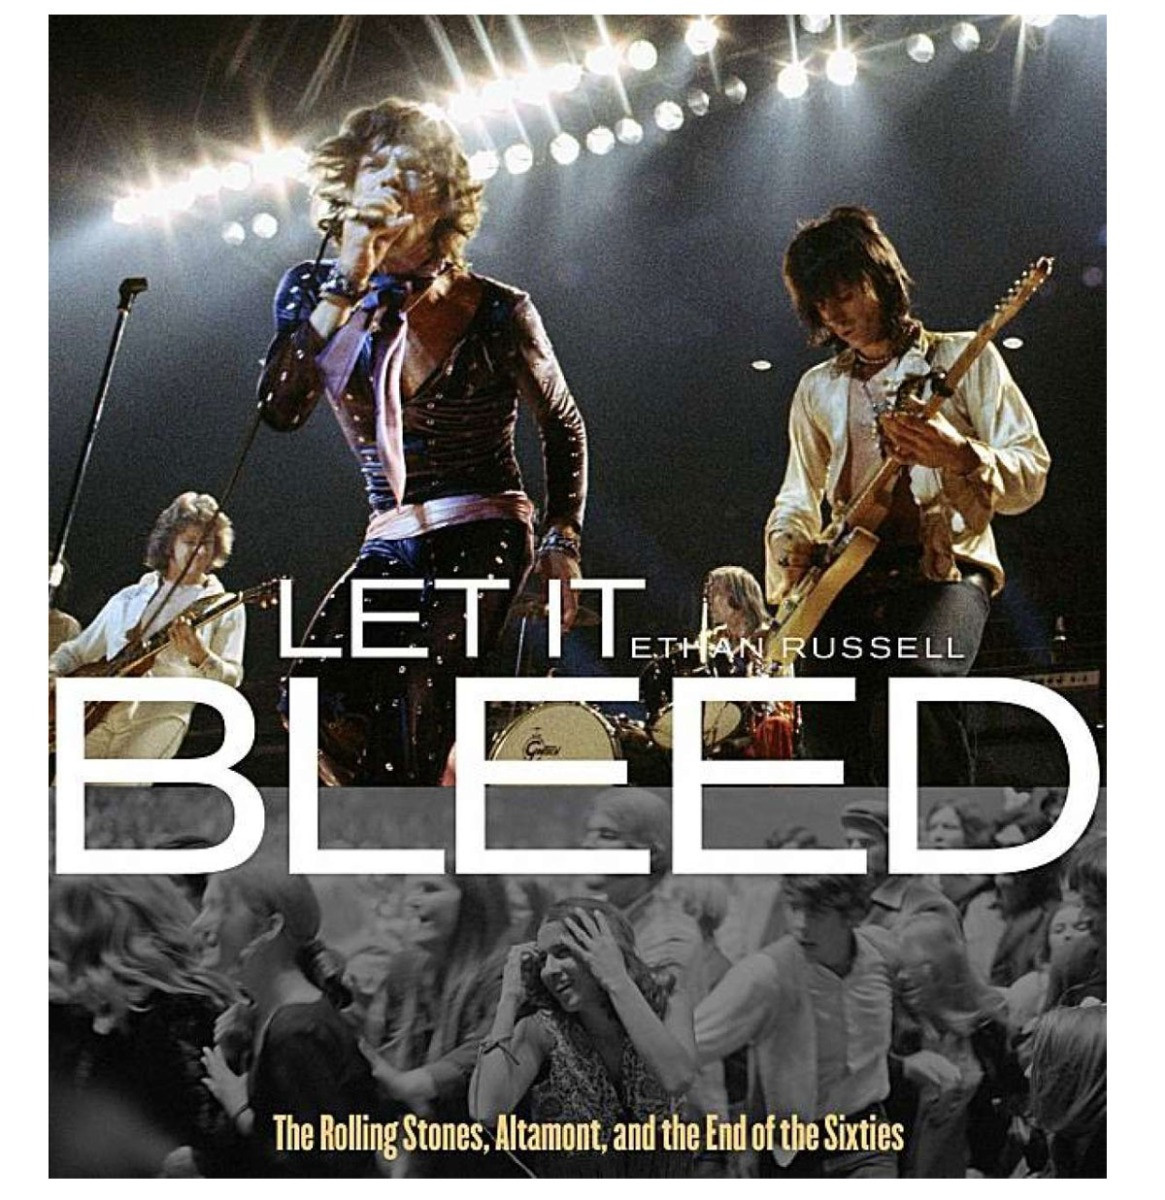 Let It Bleed, The Rolling Stones, Altamont and the end of the Sixties Hardcover Boek - Beschadigde Cover